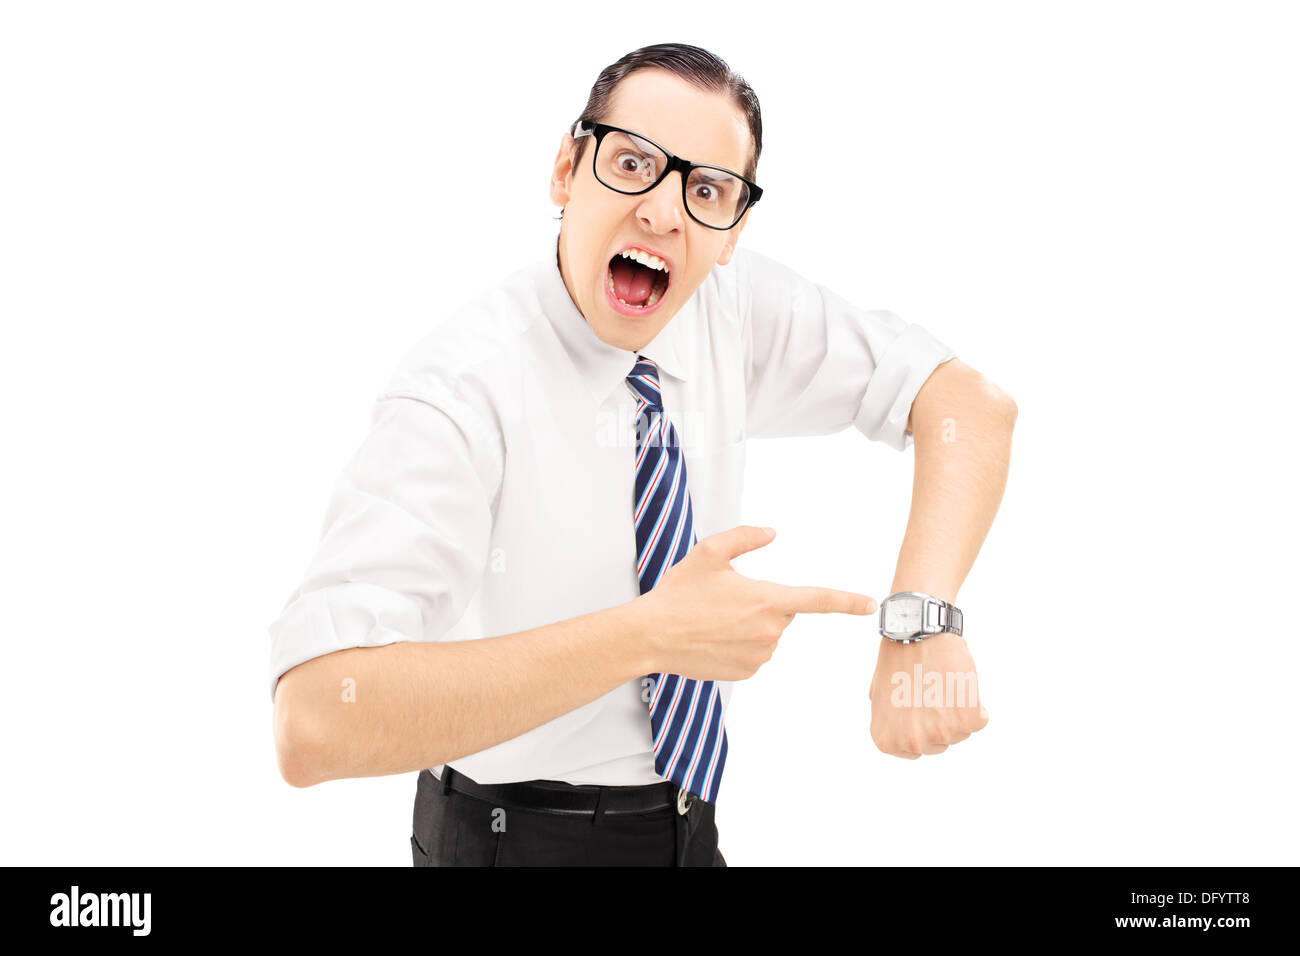 Angry man shouting and pointing on a wrist watch Stock Photo